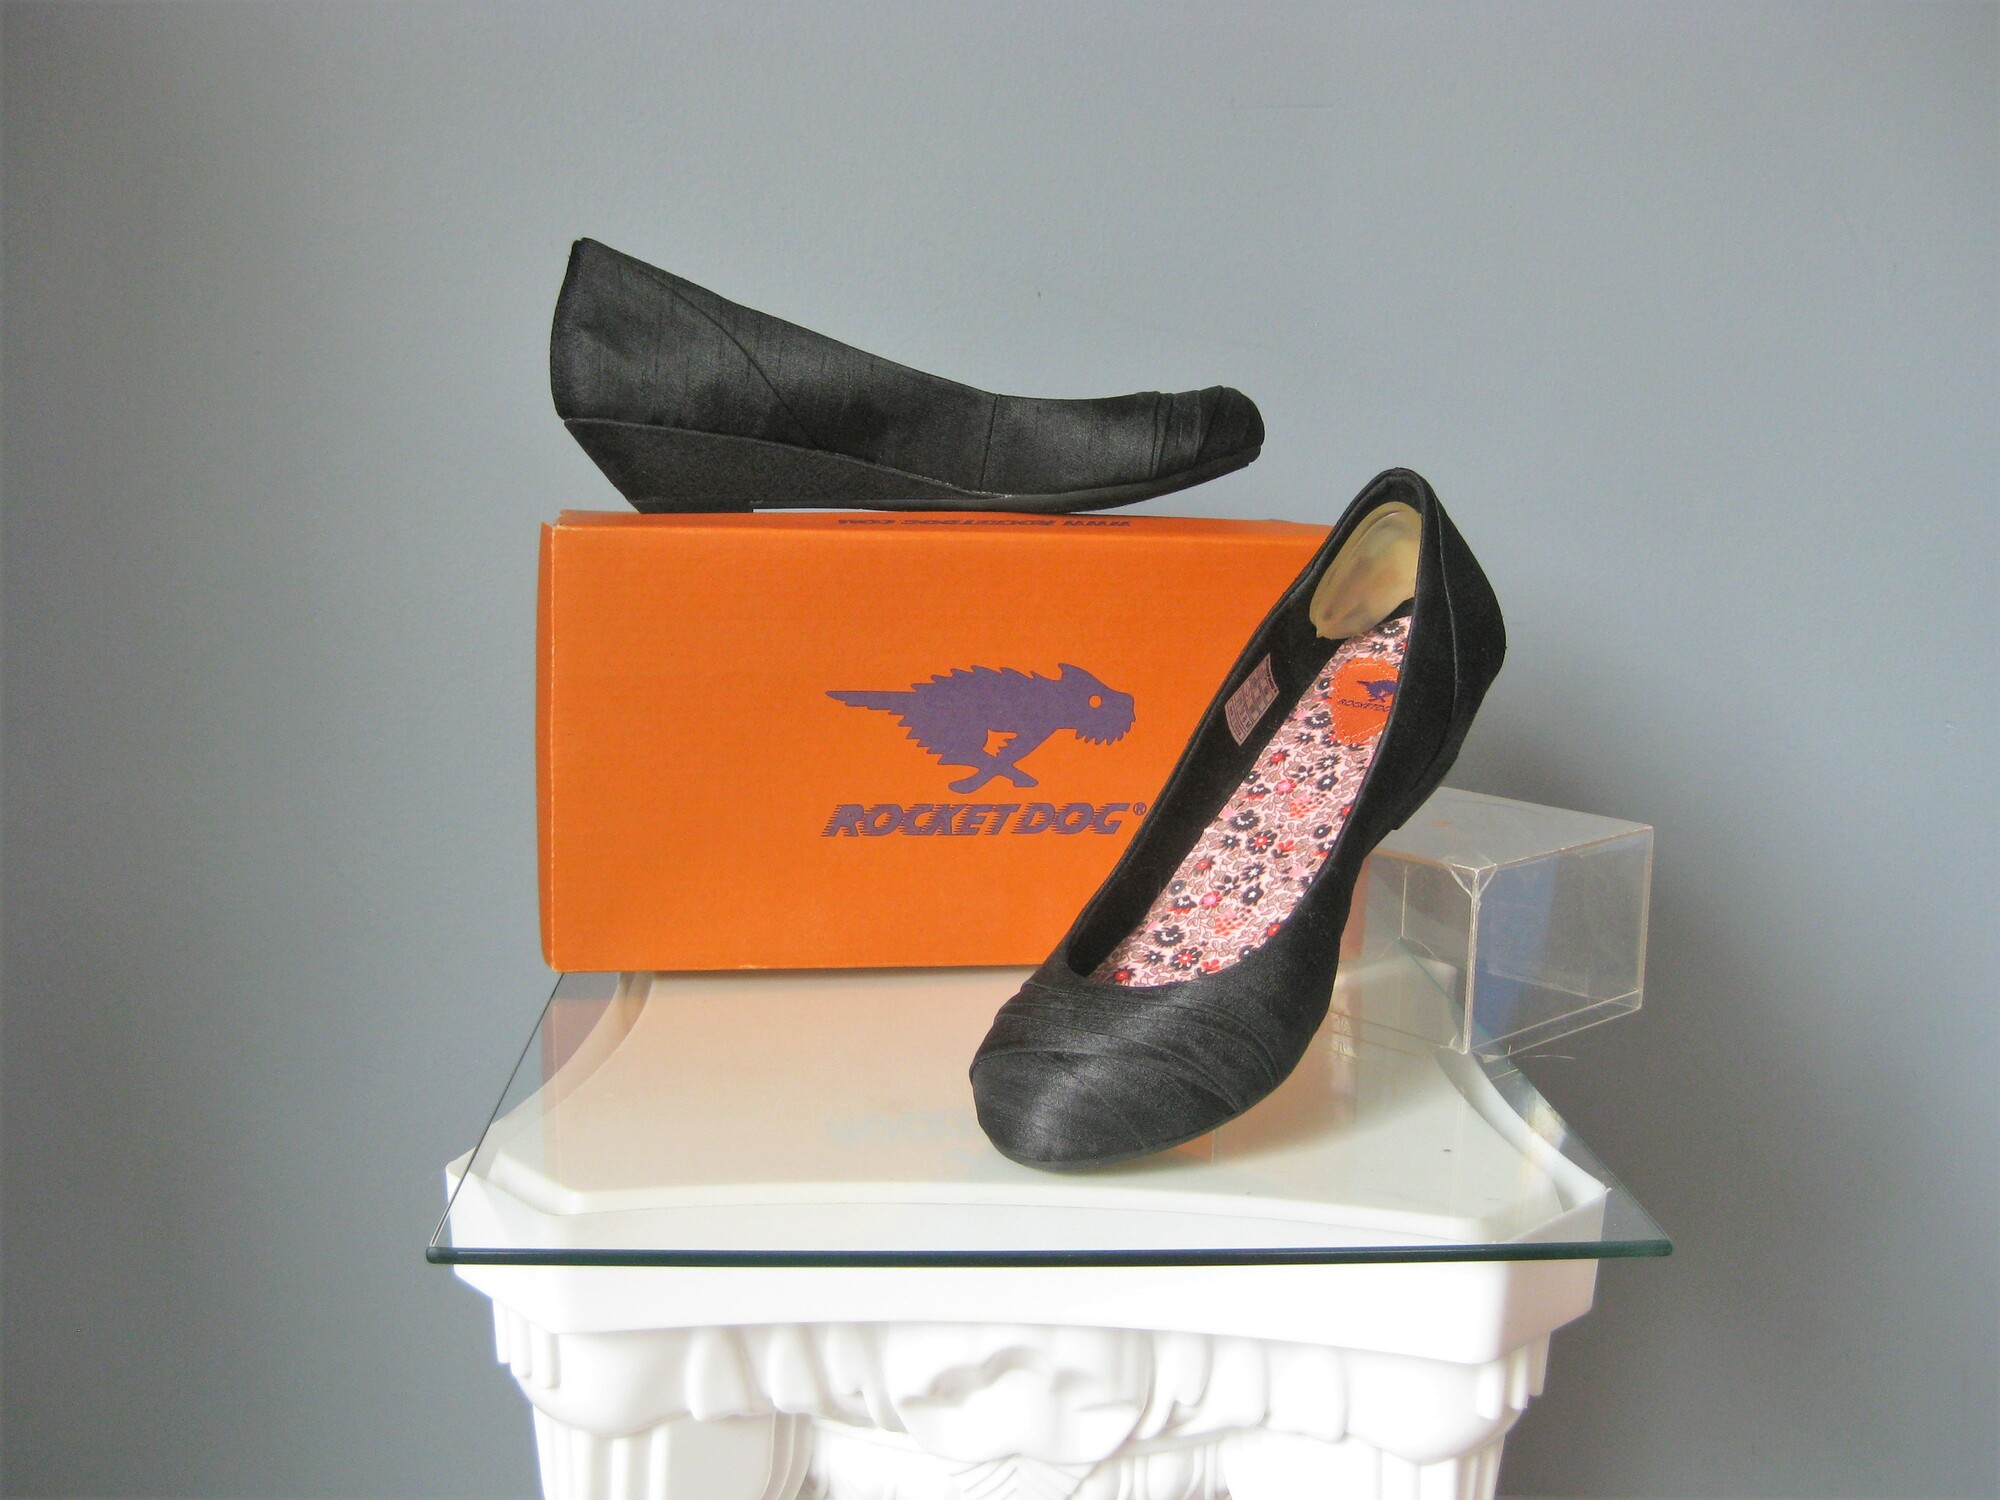 Rocket Dog Wedge, Black, Size: 8
New in box dressy black wedge closed toe shoes by Rocket Dog
This model is called Tonicts, these are size 8
covered with black thai silk
pretty floral lining


Thanks for looking!
#46551